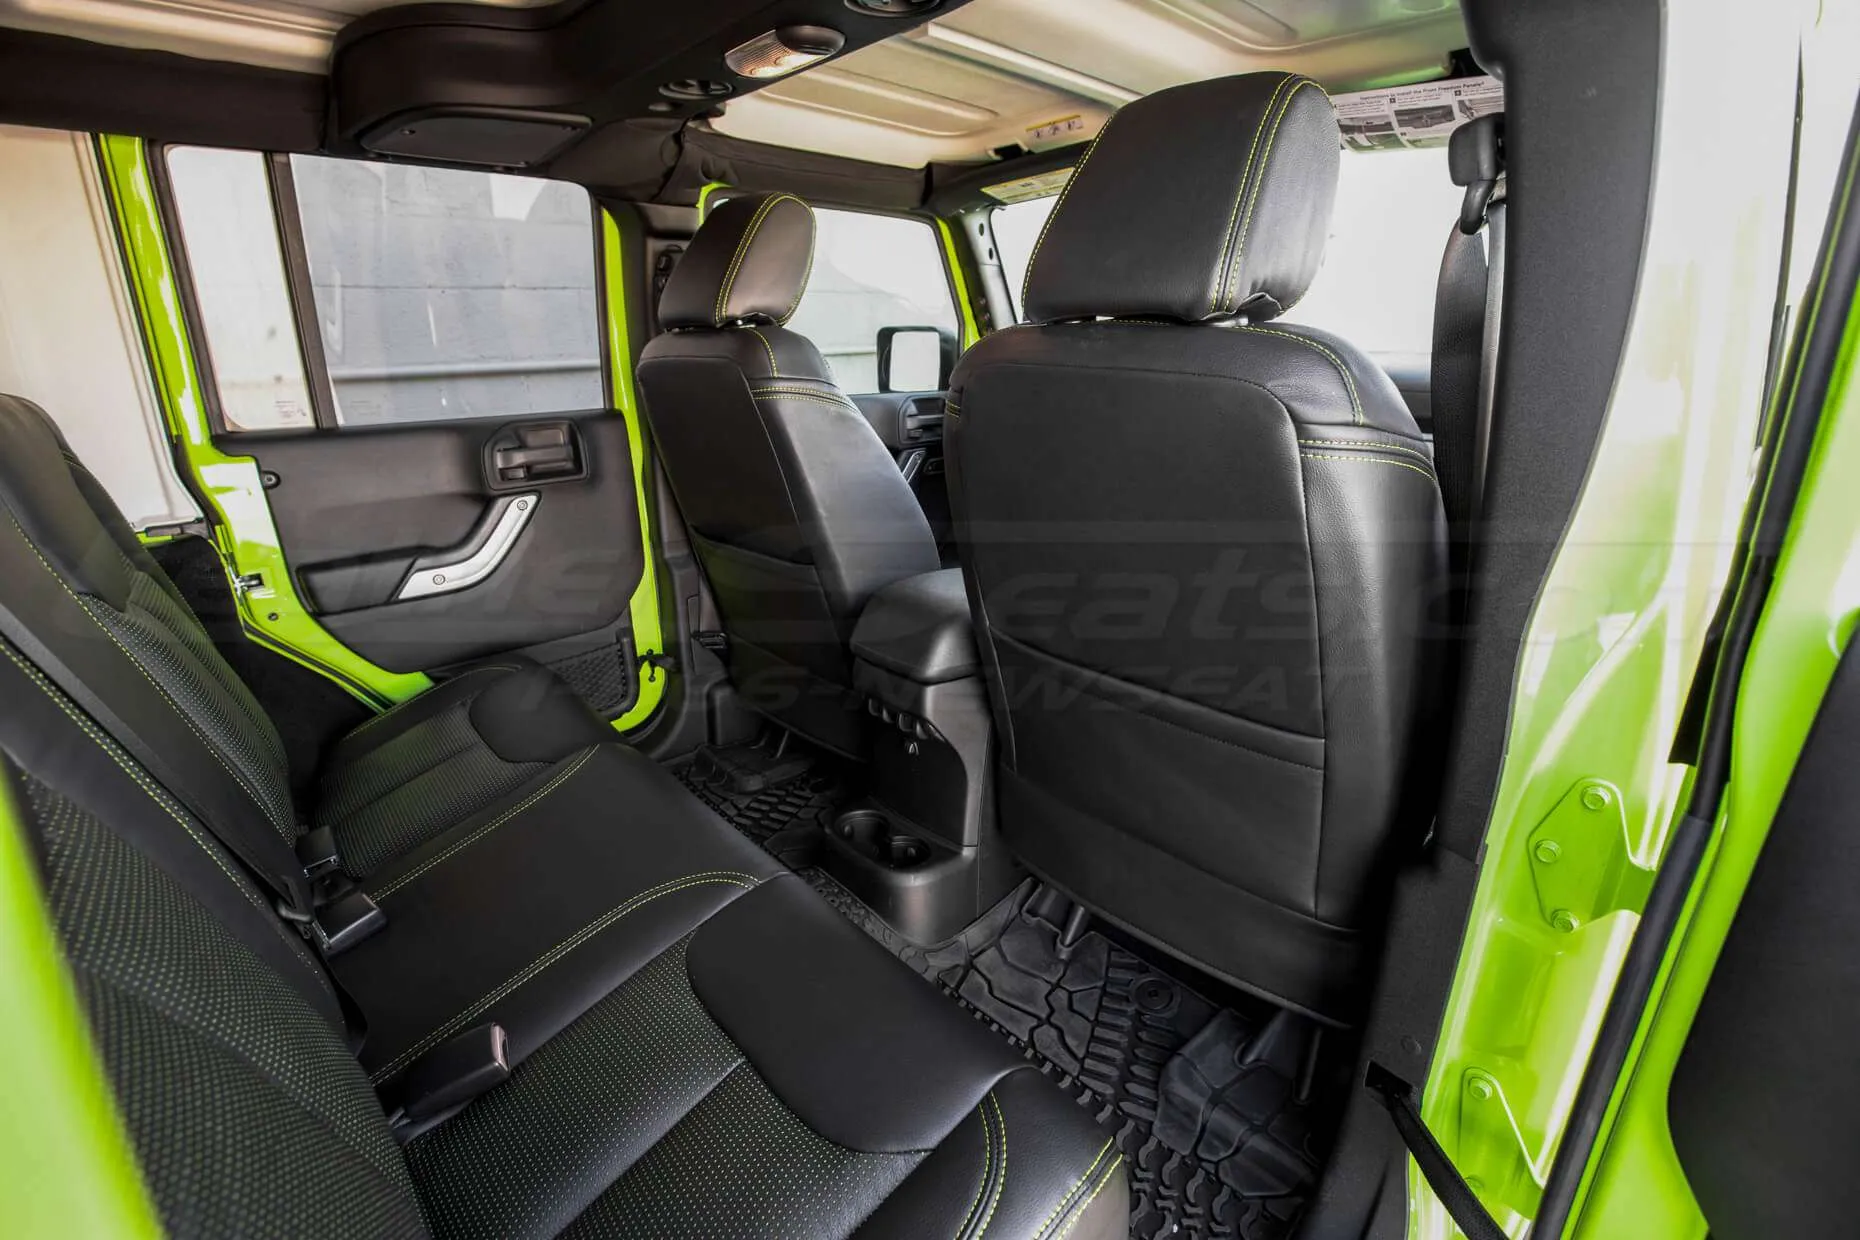 Jeep Wrangler Installed Leather Seats - Black & Piazza Green - Back view of front seats